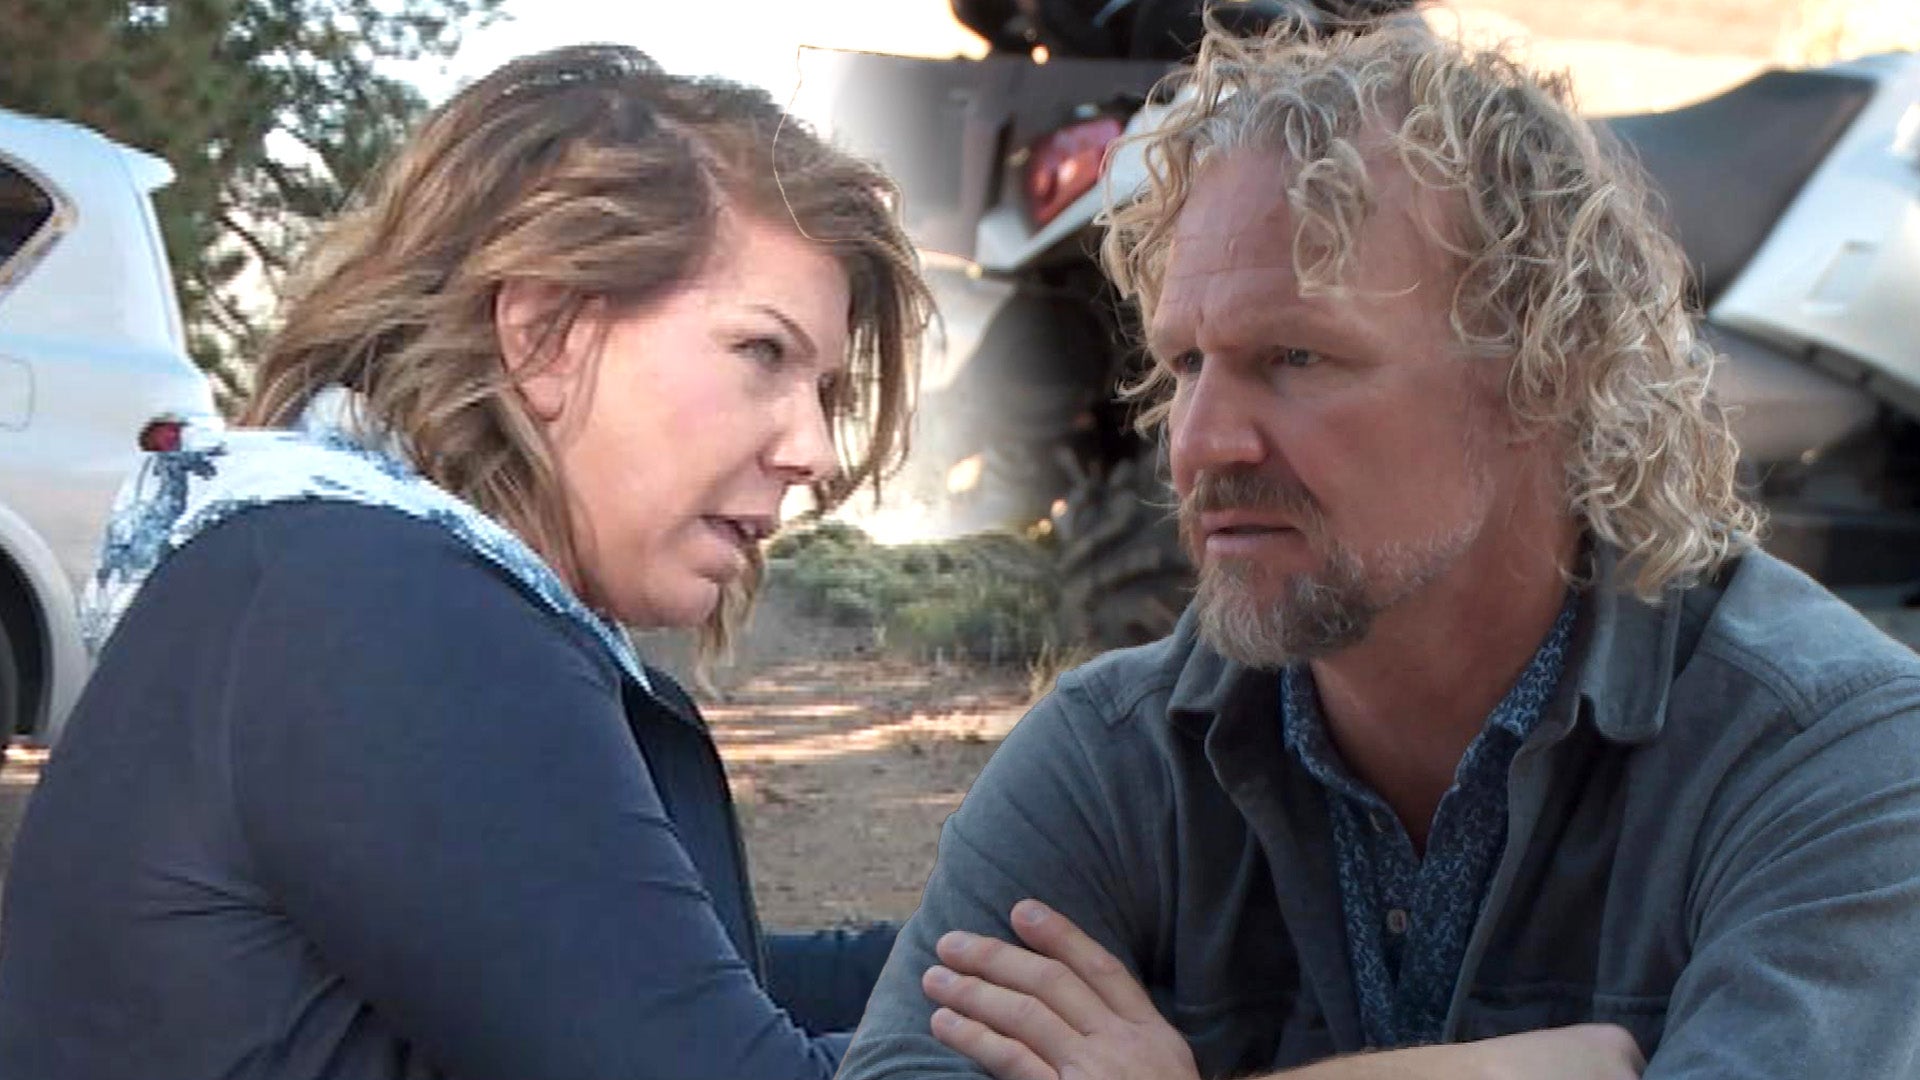 'Sister Wives': Kody and Meri Get Heated Over Dividing Their Property (Exclusive)